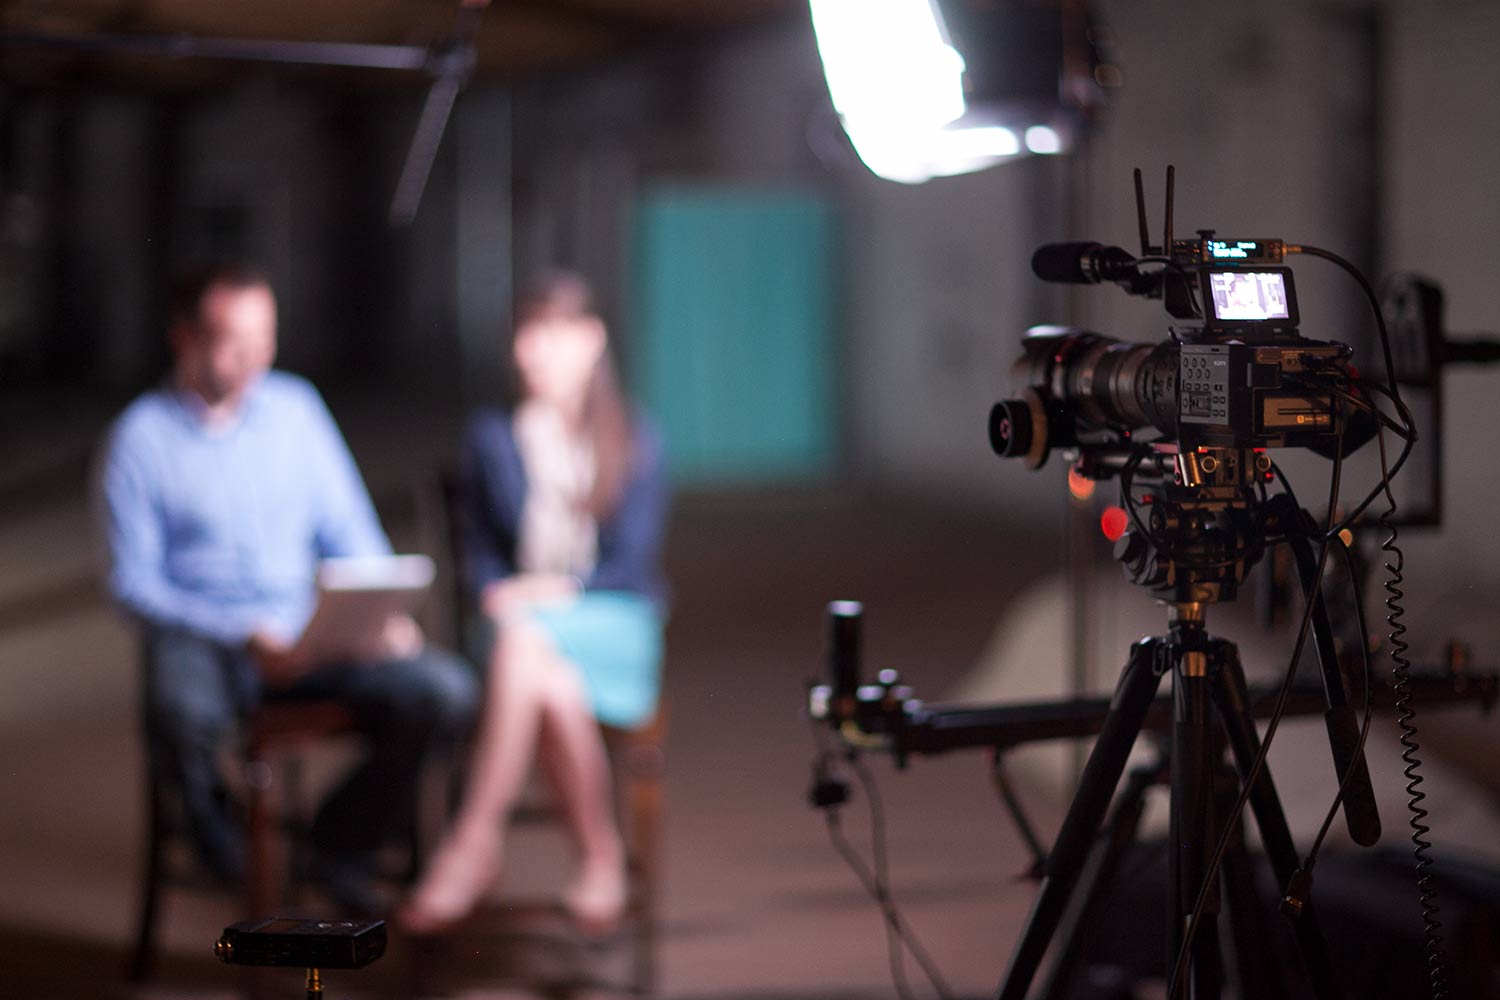 How to Choose the Right Video Production Company